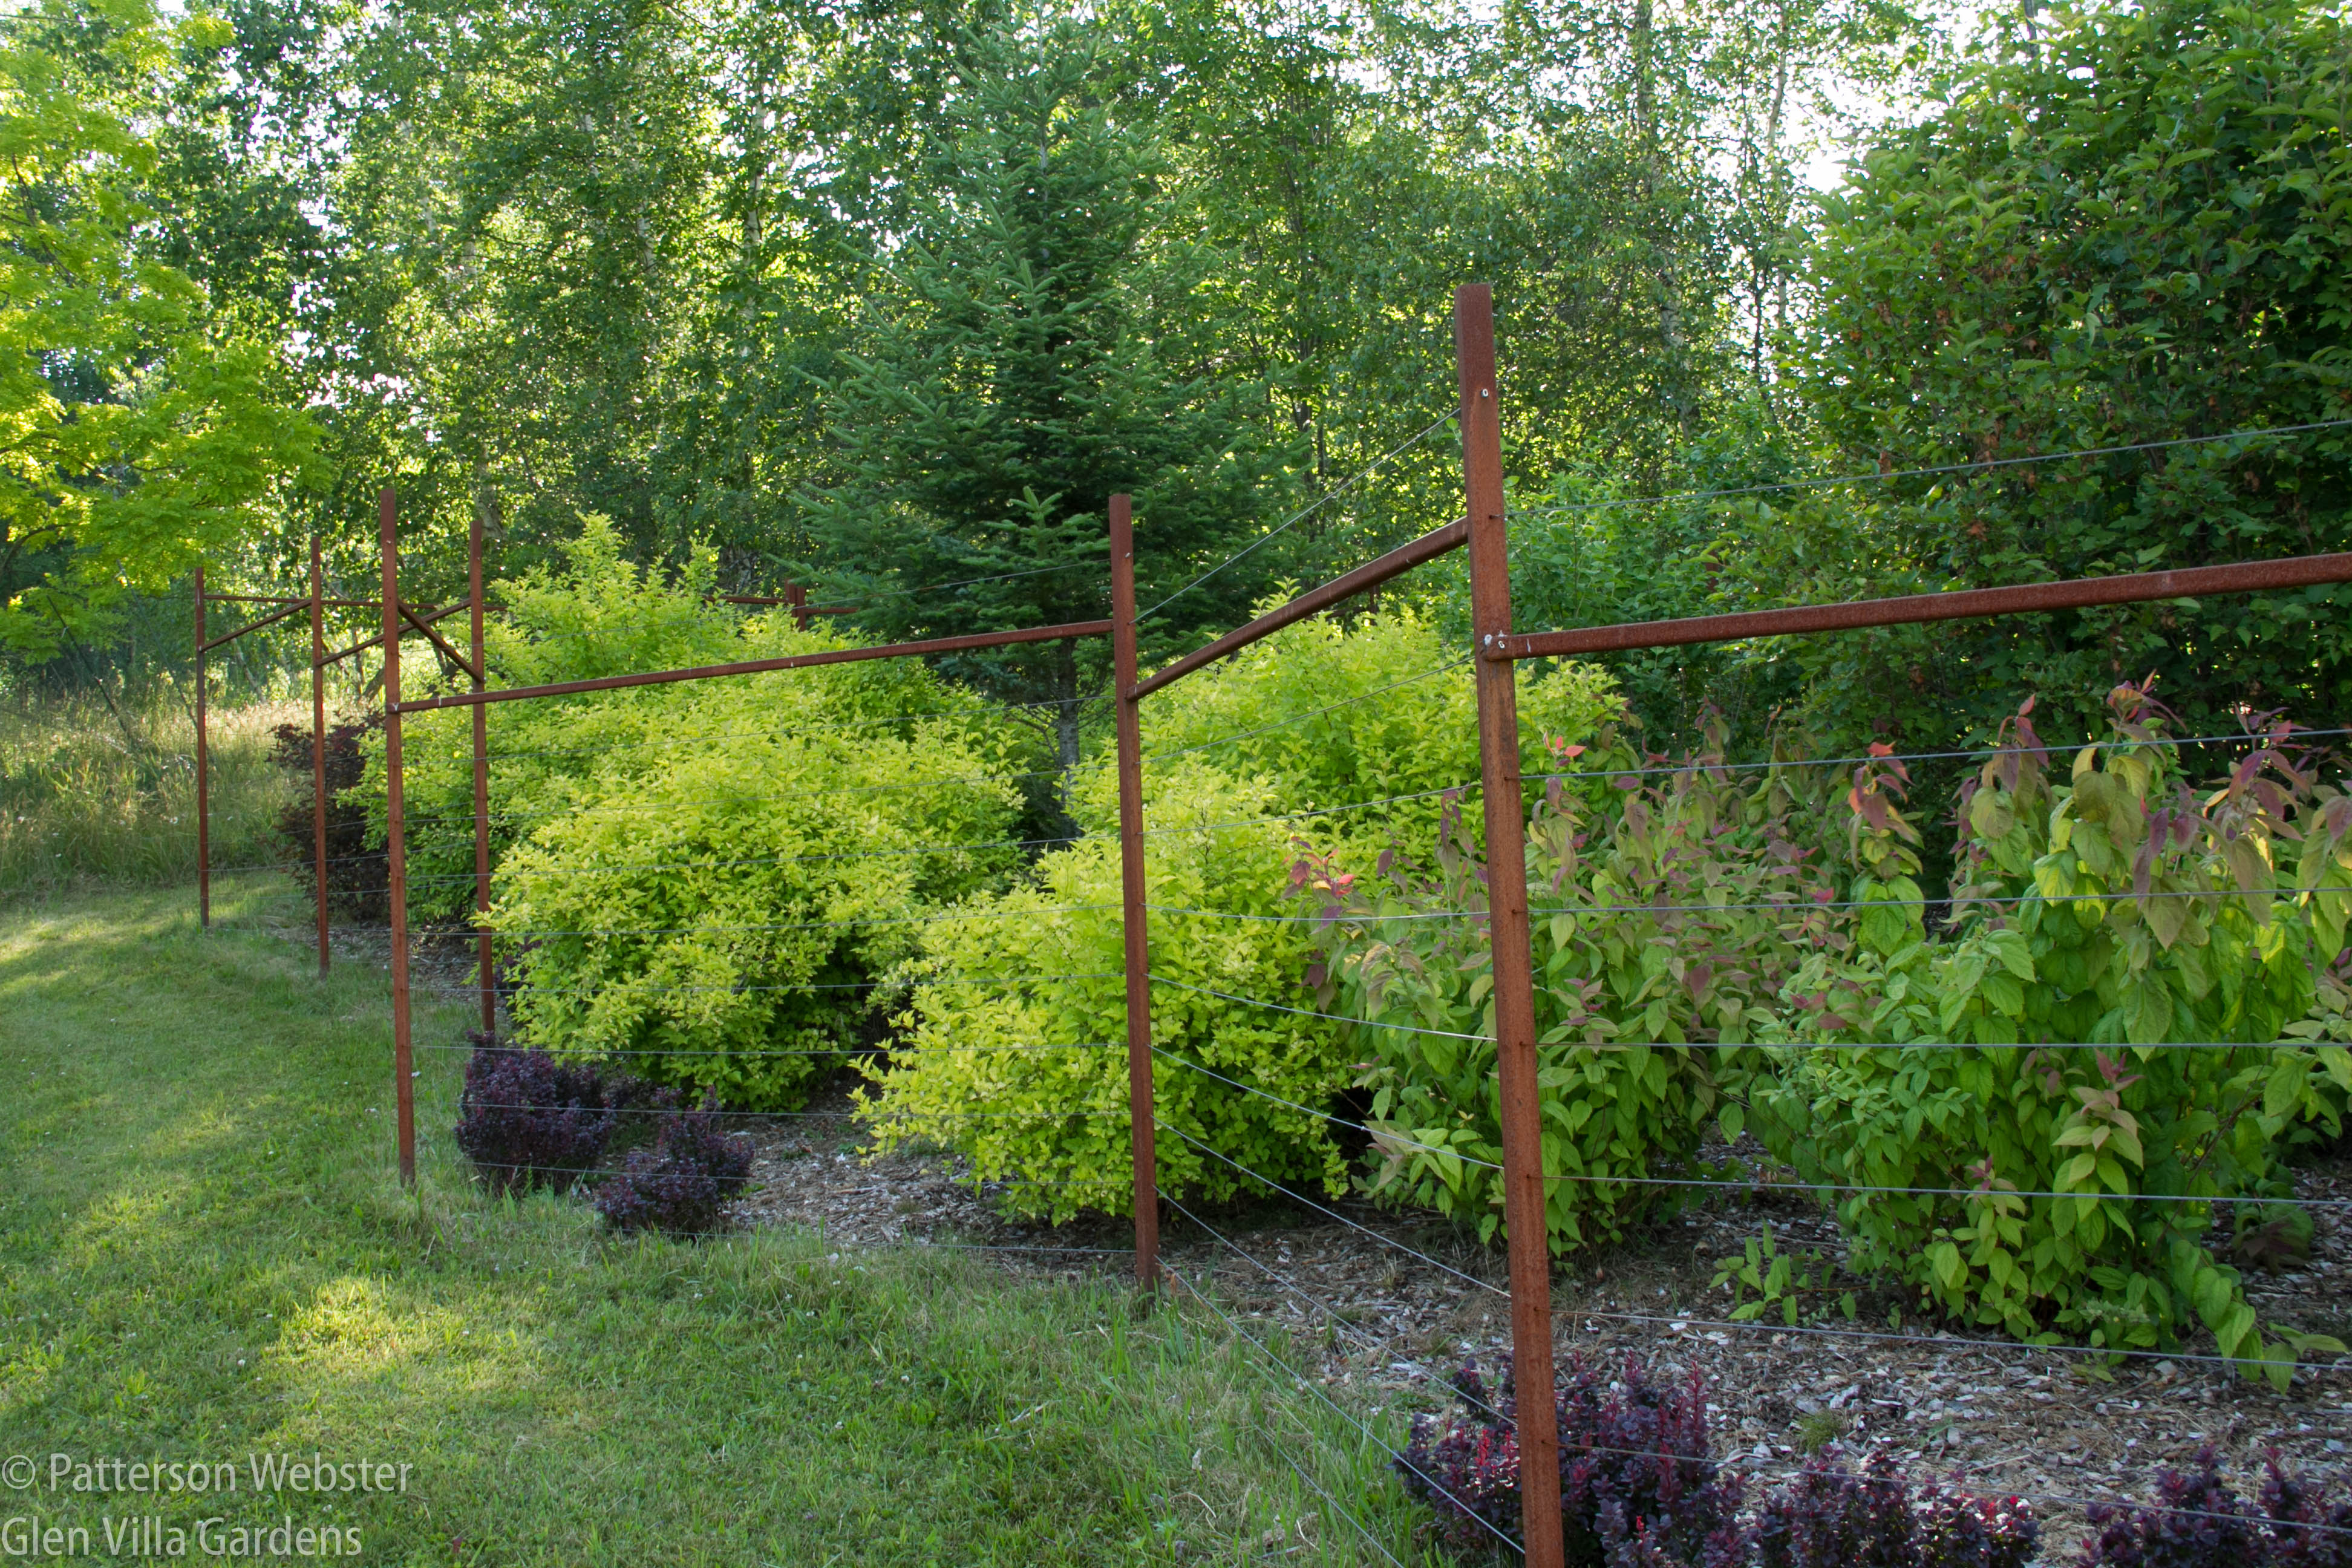 I designed this fence made of steel posts and wire cable to be attractive but as invisible as possible from a distance.